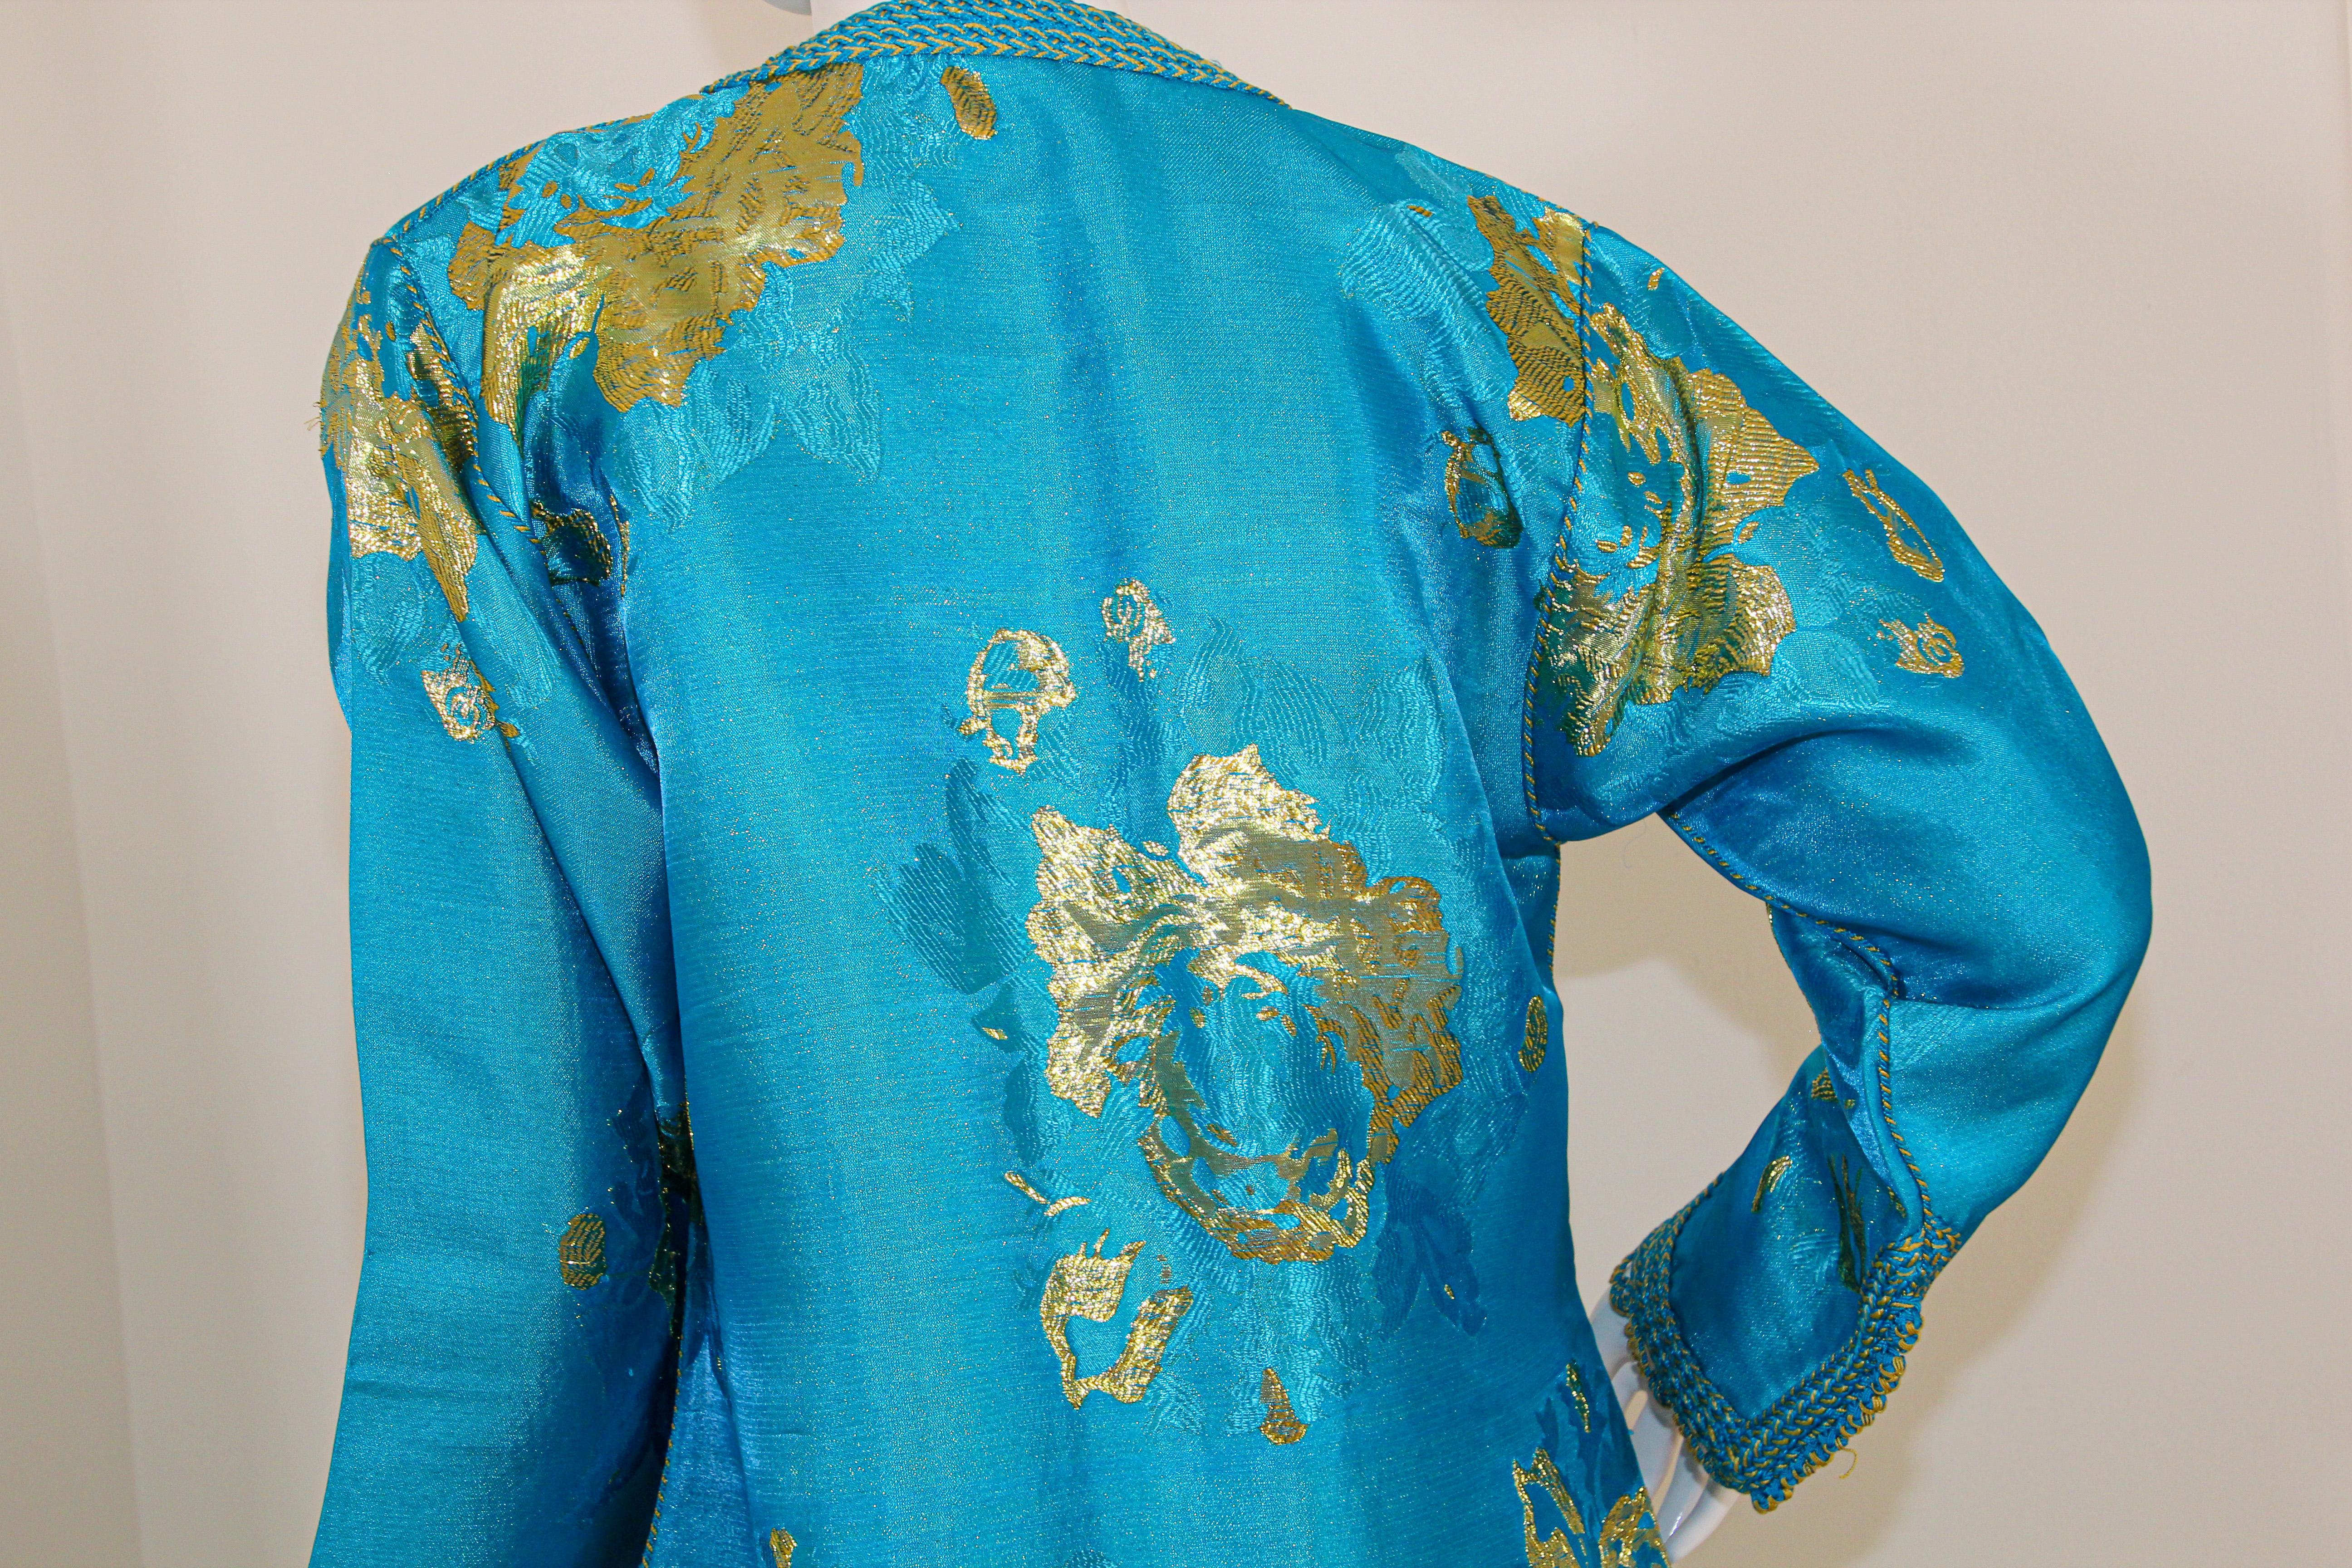 Moroccan Kaftan in Turquoise and Gold Floral Brocade Metallic Lame 4